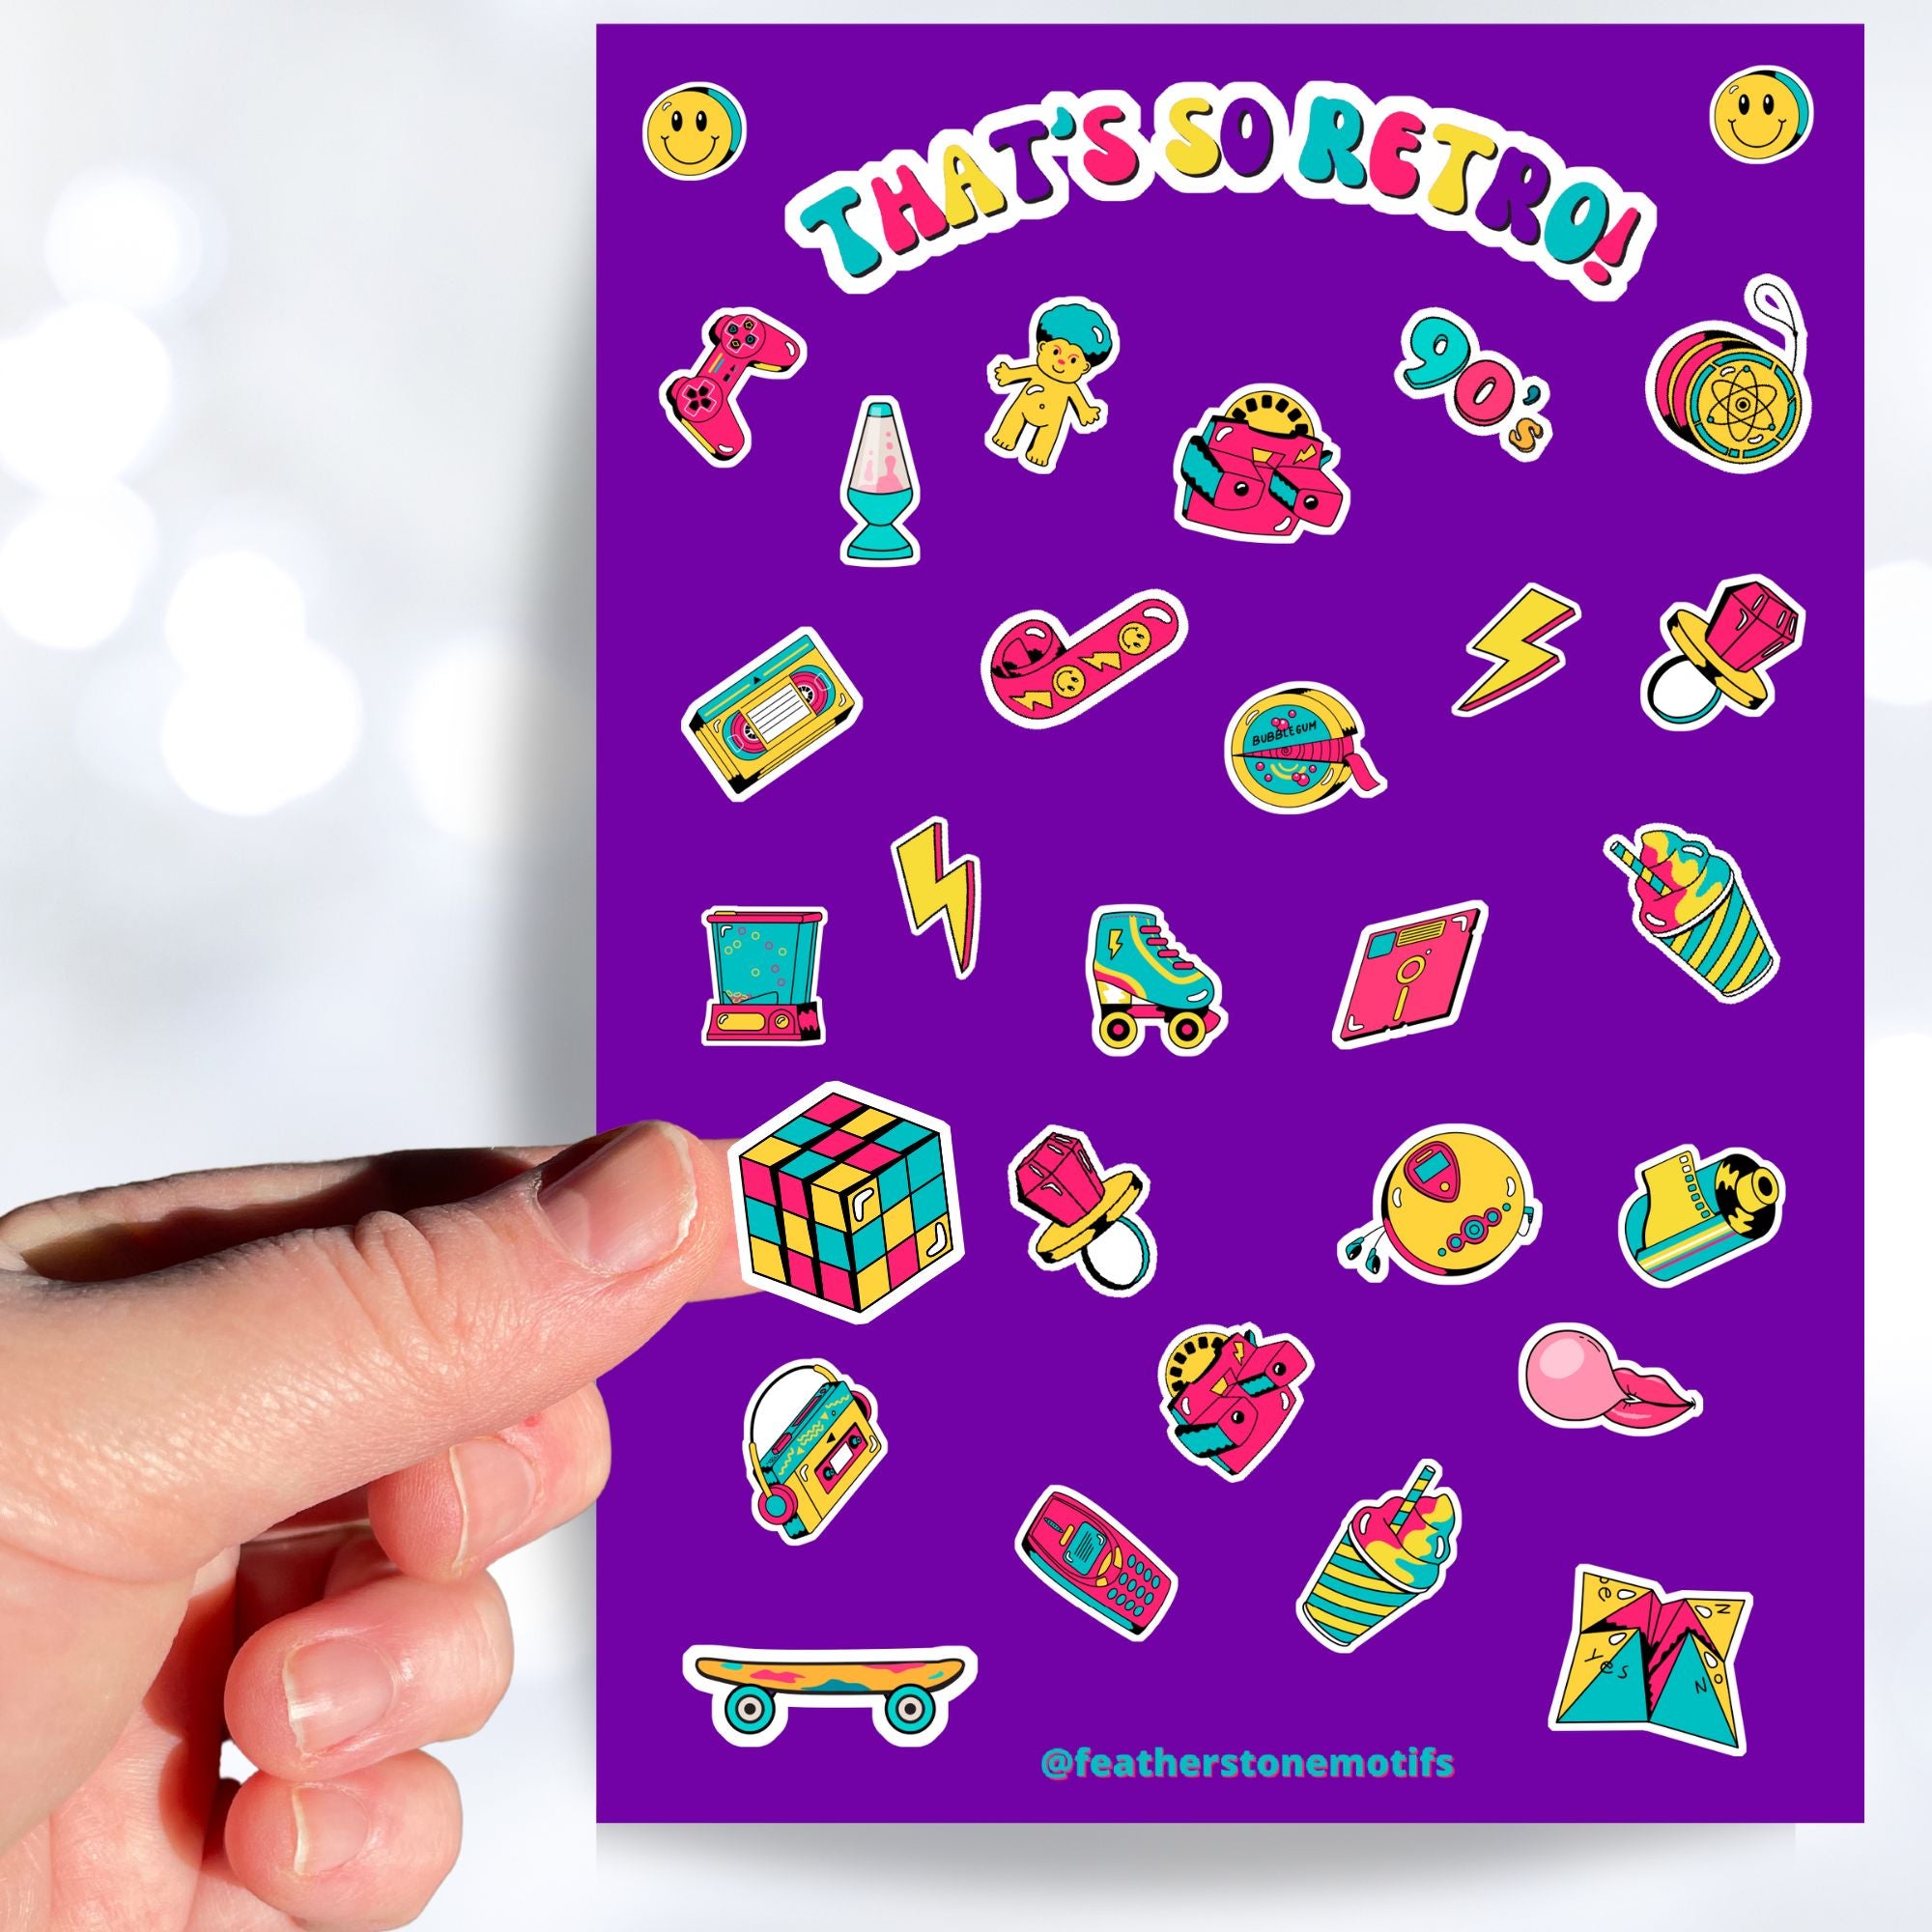 This sticker sheet is filled with images of items from the 70's, 80's, and 90's. Sticker images include a troll doll, roller skate, Rubik's cube, and a skateboard. This image shows a hand holding a Rubik's cube above the sticker sheet.